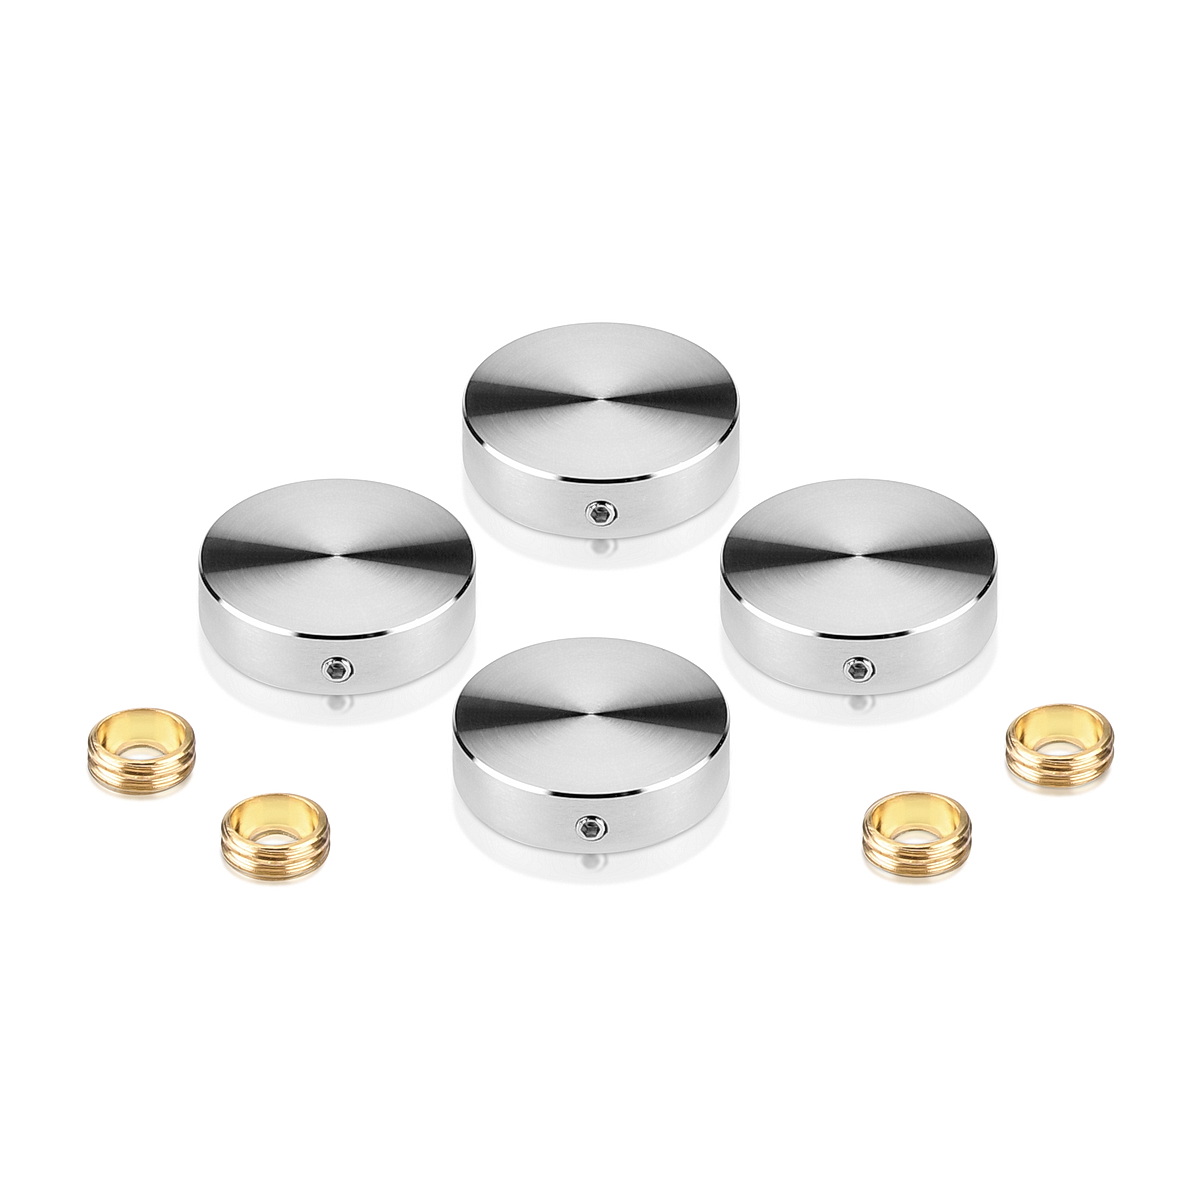 Set of 4 Locking Screw Cover Diameter 1'', Satin Brushed Stainless Steel Finish (Indoor or Outdoor)